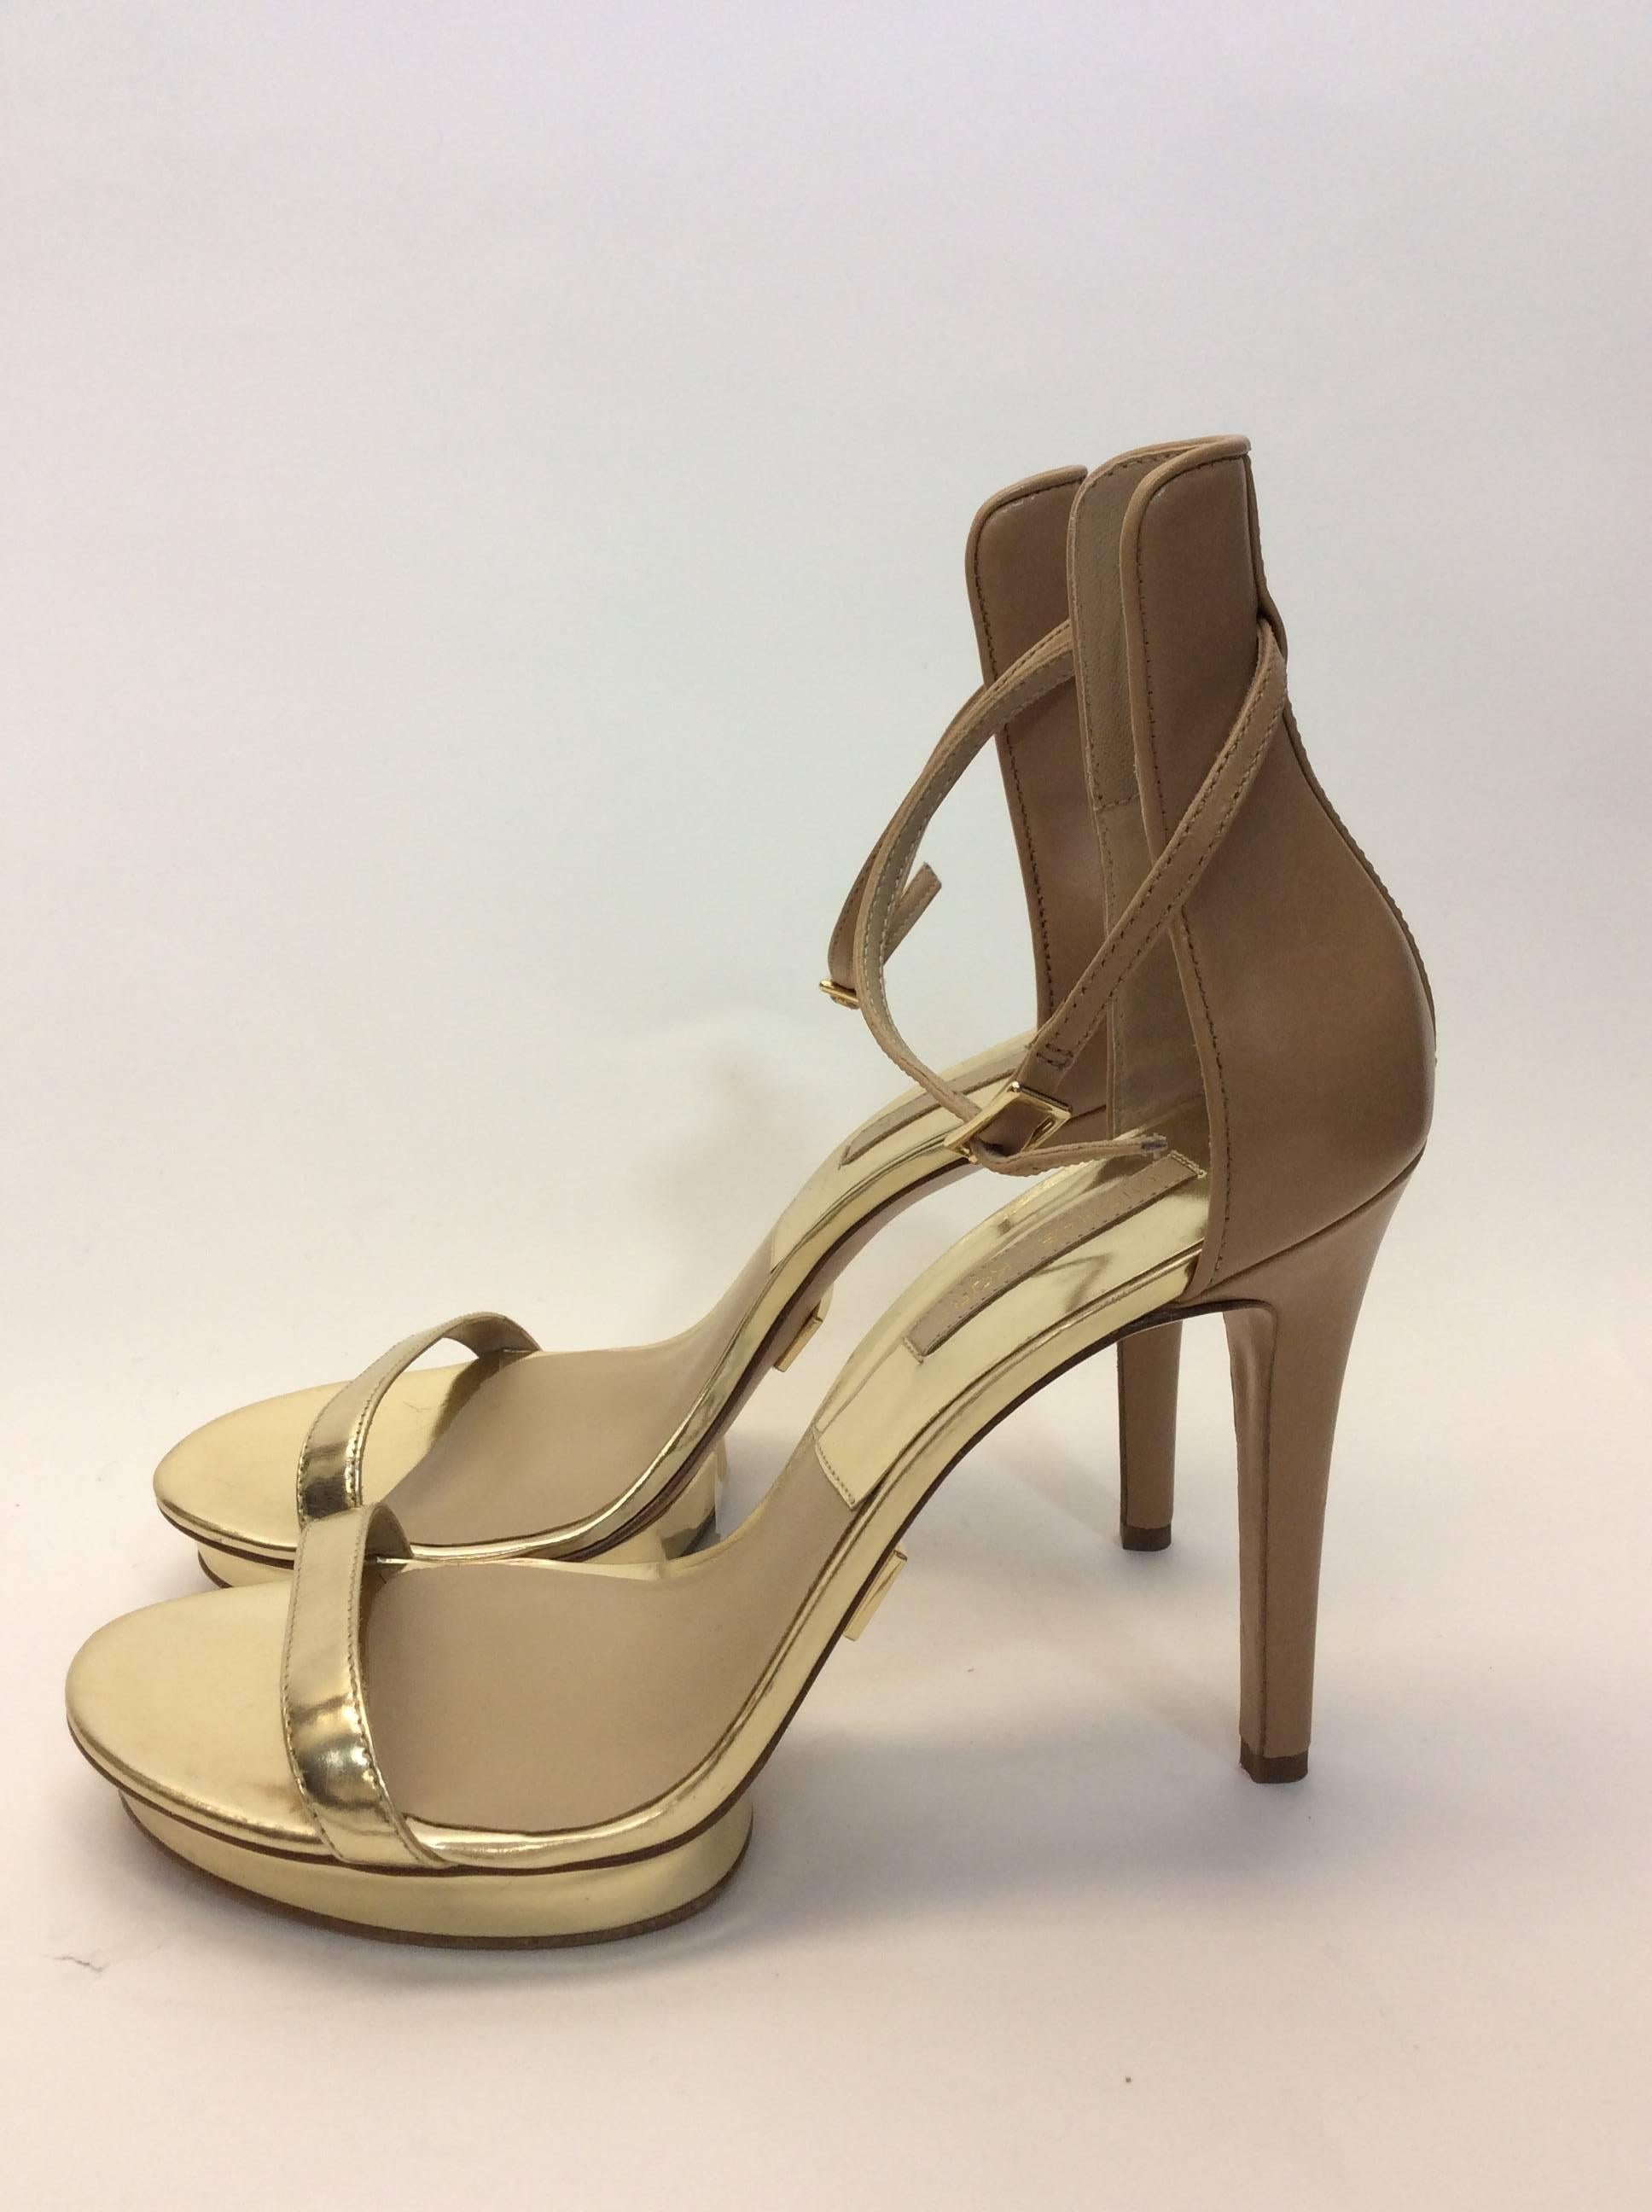 Michael Kors Gold Strap Heels
Nude leather ankle strap
Platform and stiletto style
Made in China
4 inch heel
Size 38.5